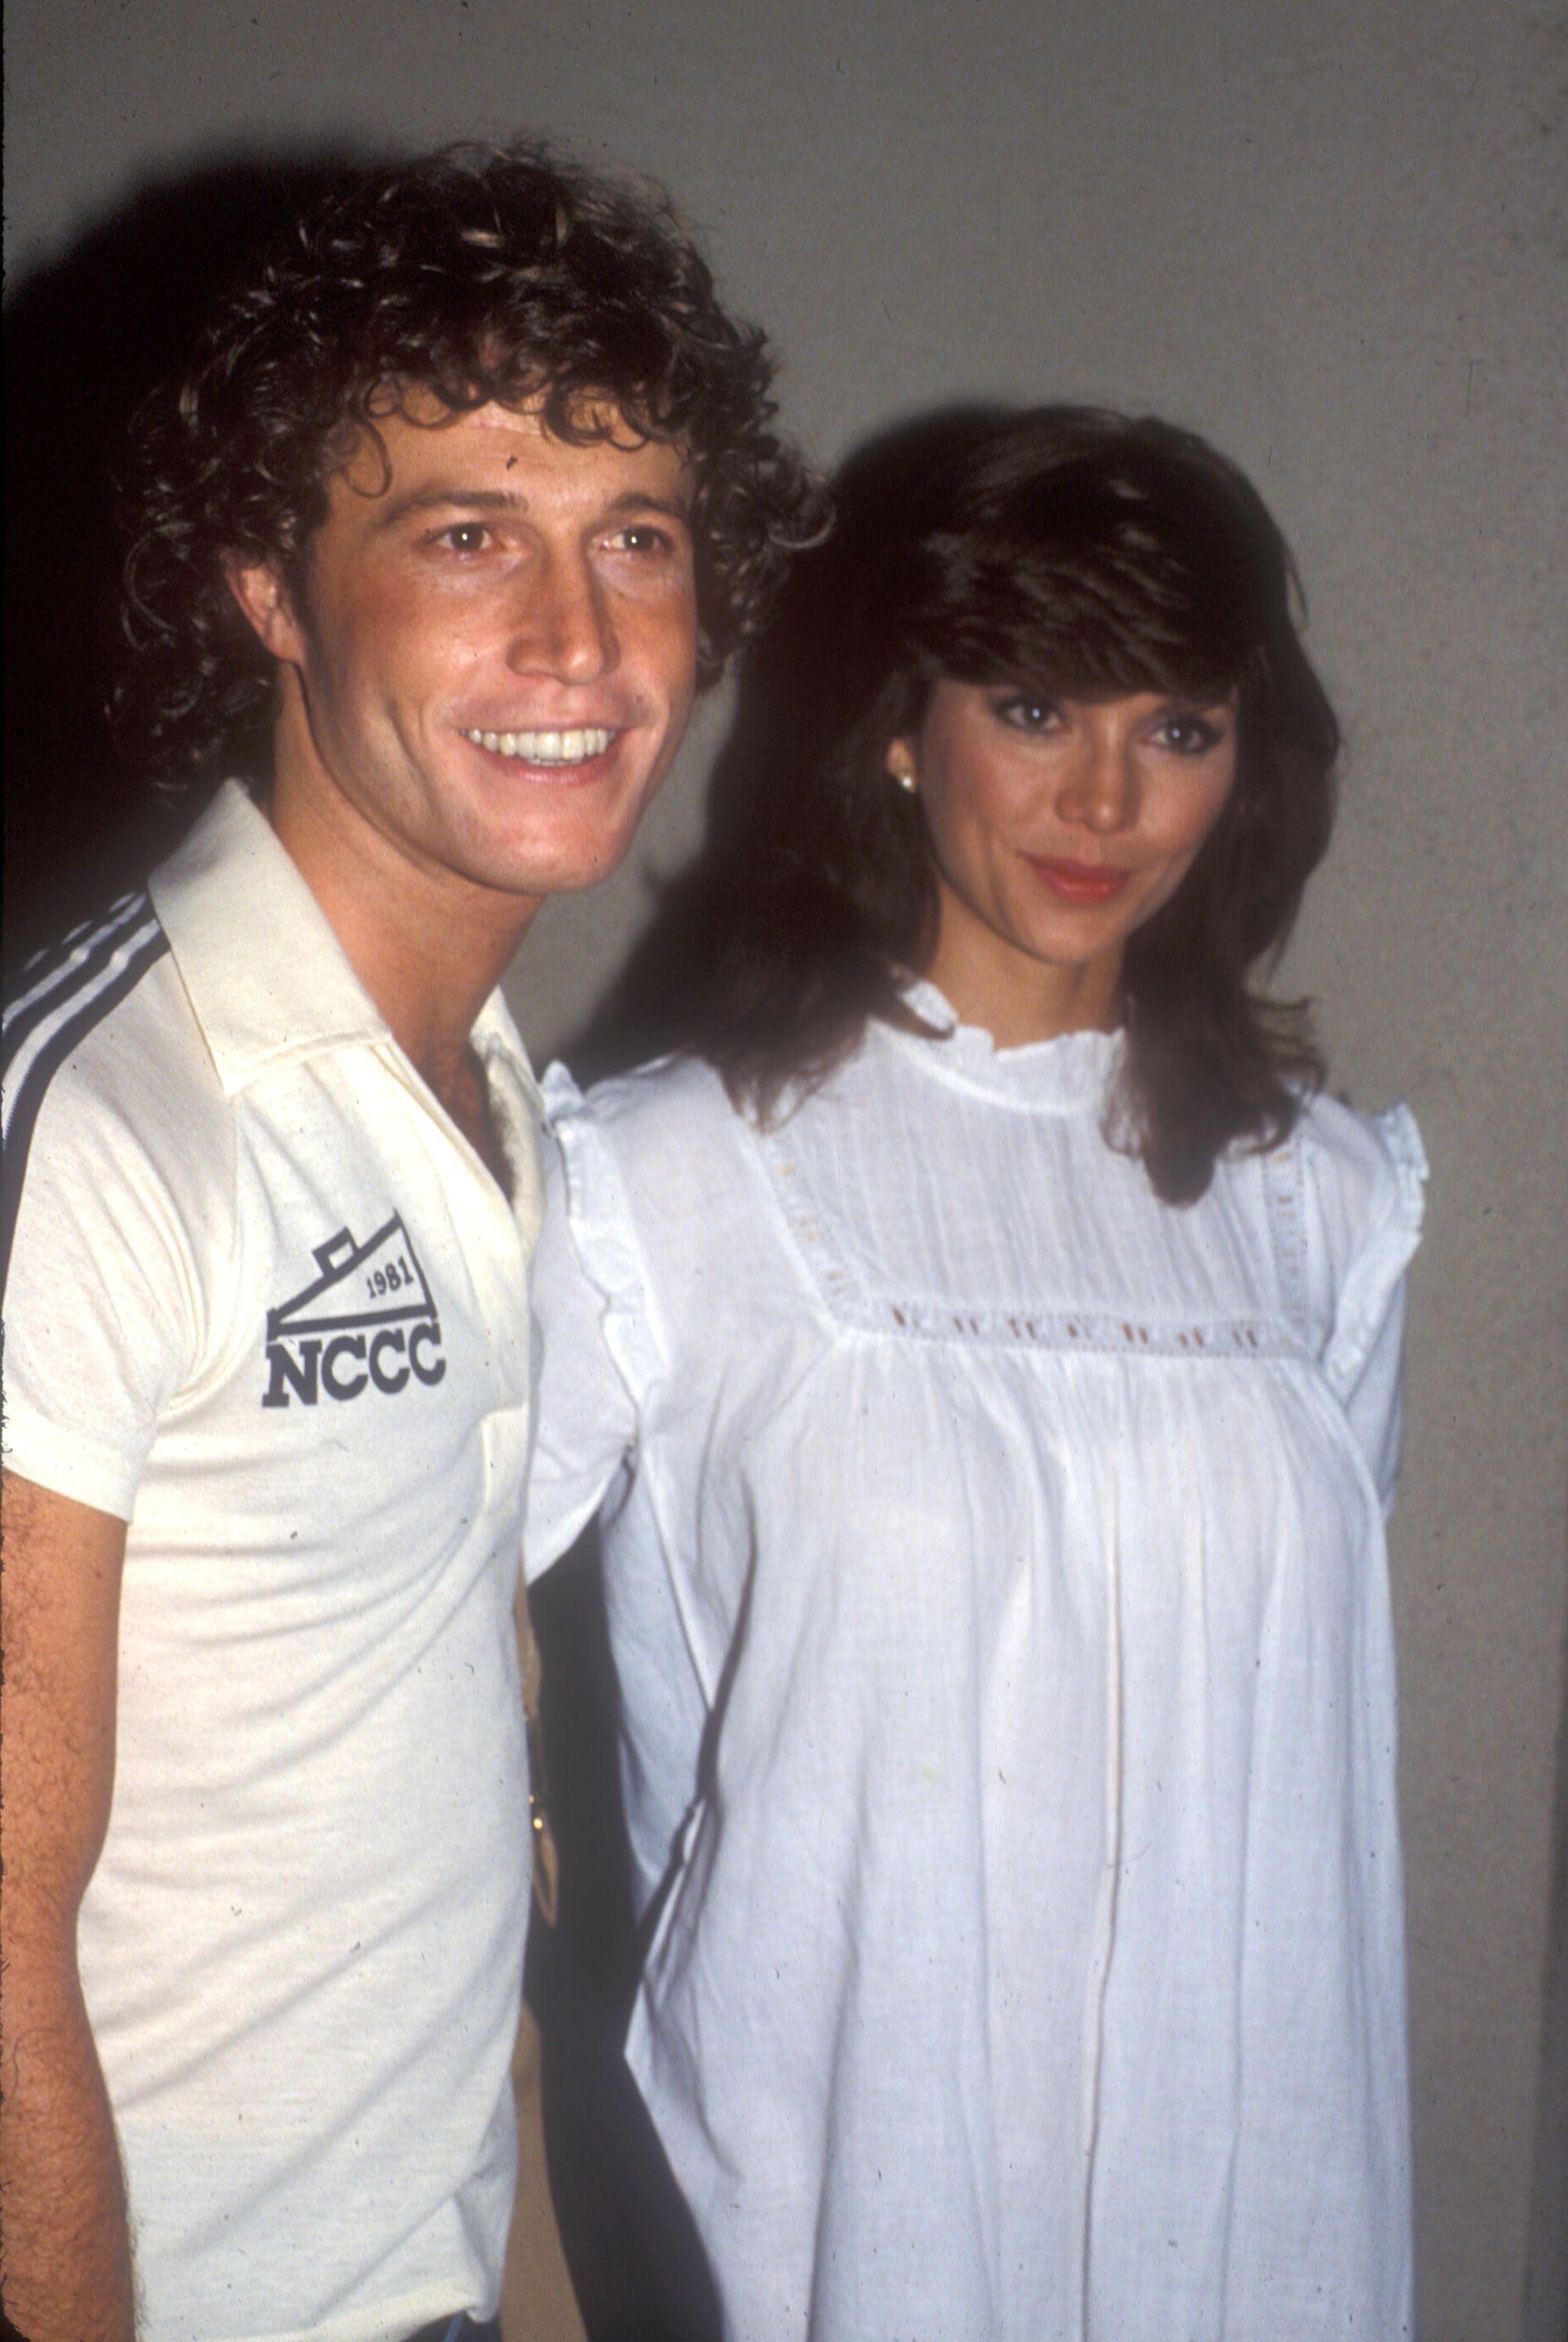 File Photo of Andy Gibb & Victoria Principal at the PIrates of Penzance play in Los Angeles, California on June 3, 1981. | Source: Getty Images